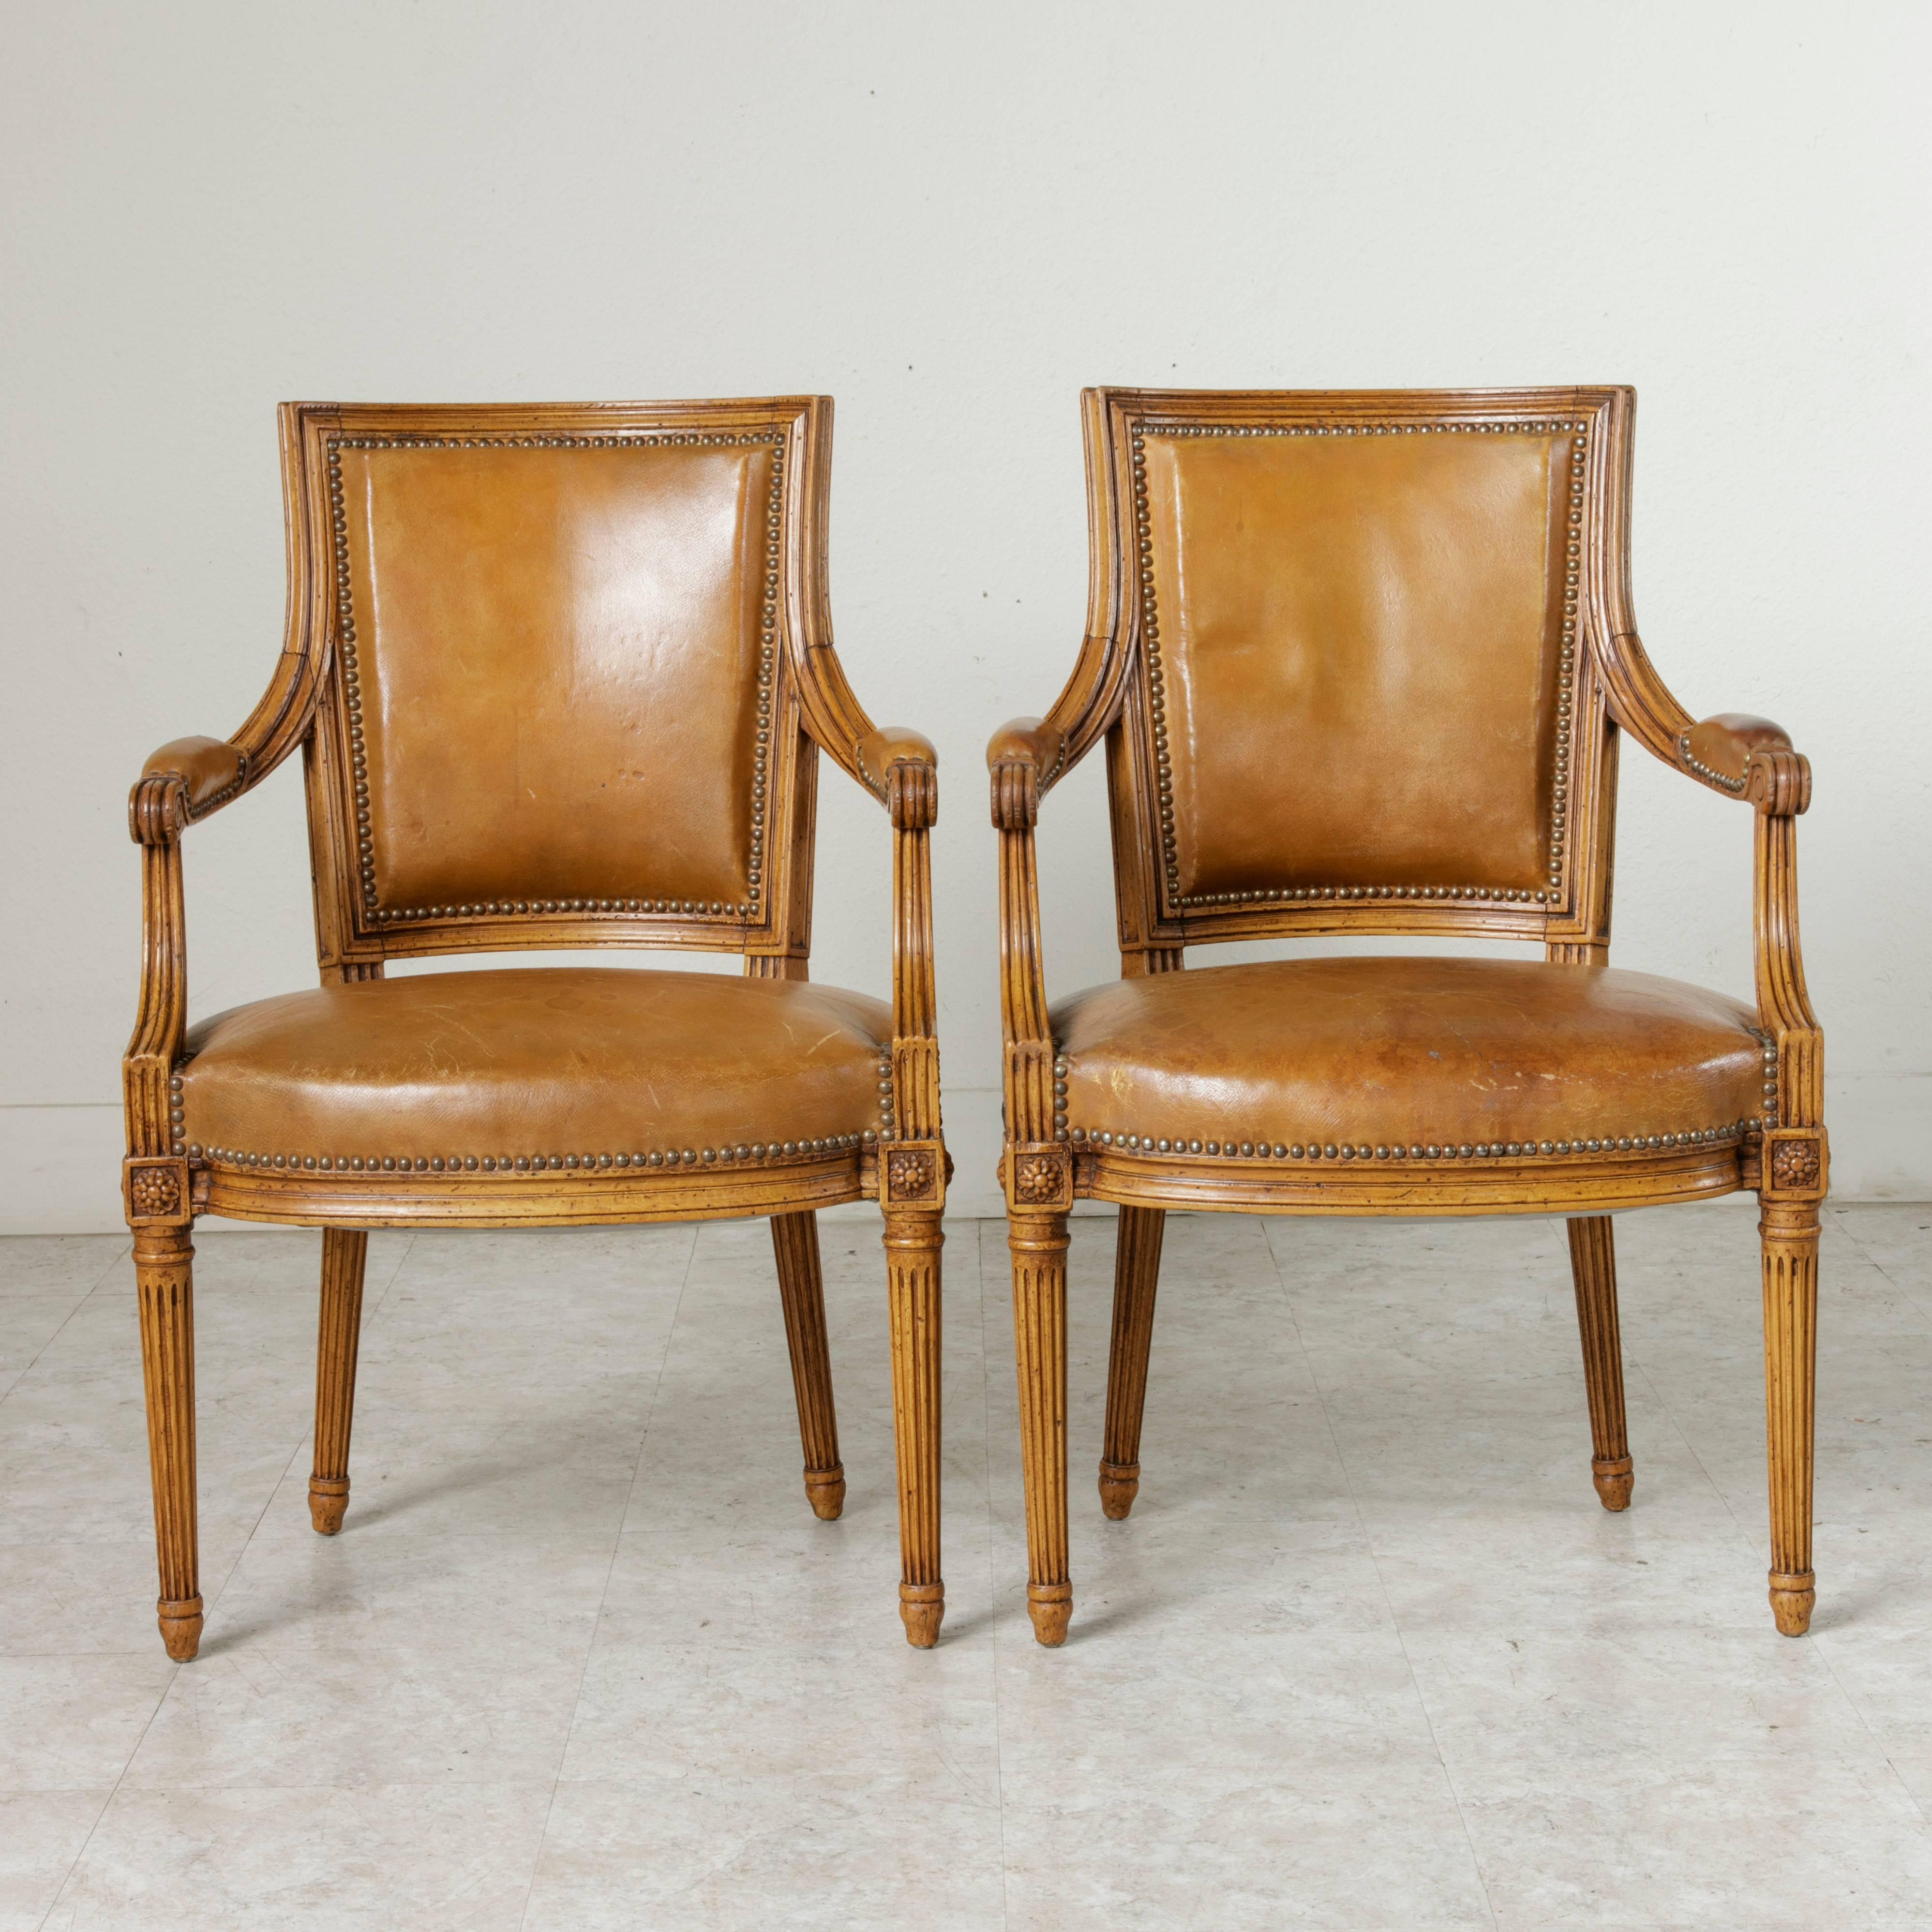 Made by Great Britain's Mayfair of London, this Mid-Century pair of Louis XVI style beechwood armchairs features Classic fluted legs, rosettes on the die joints, and scrolled armrests. A sturdy hand pegged construction lends stability to this Fine